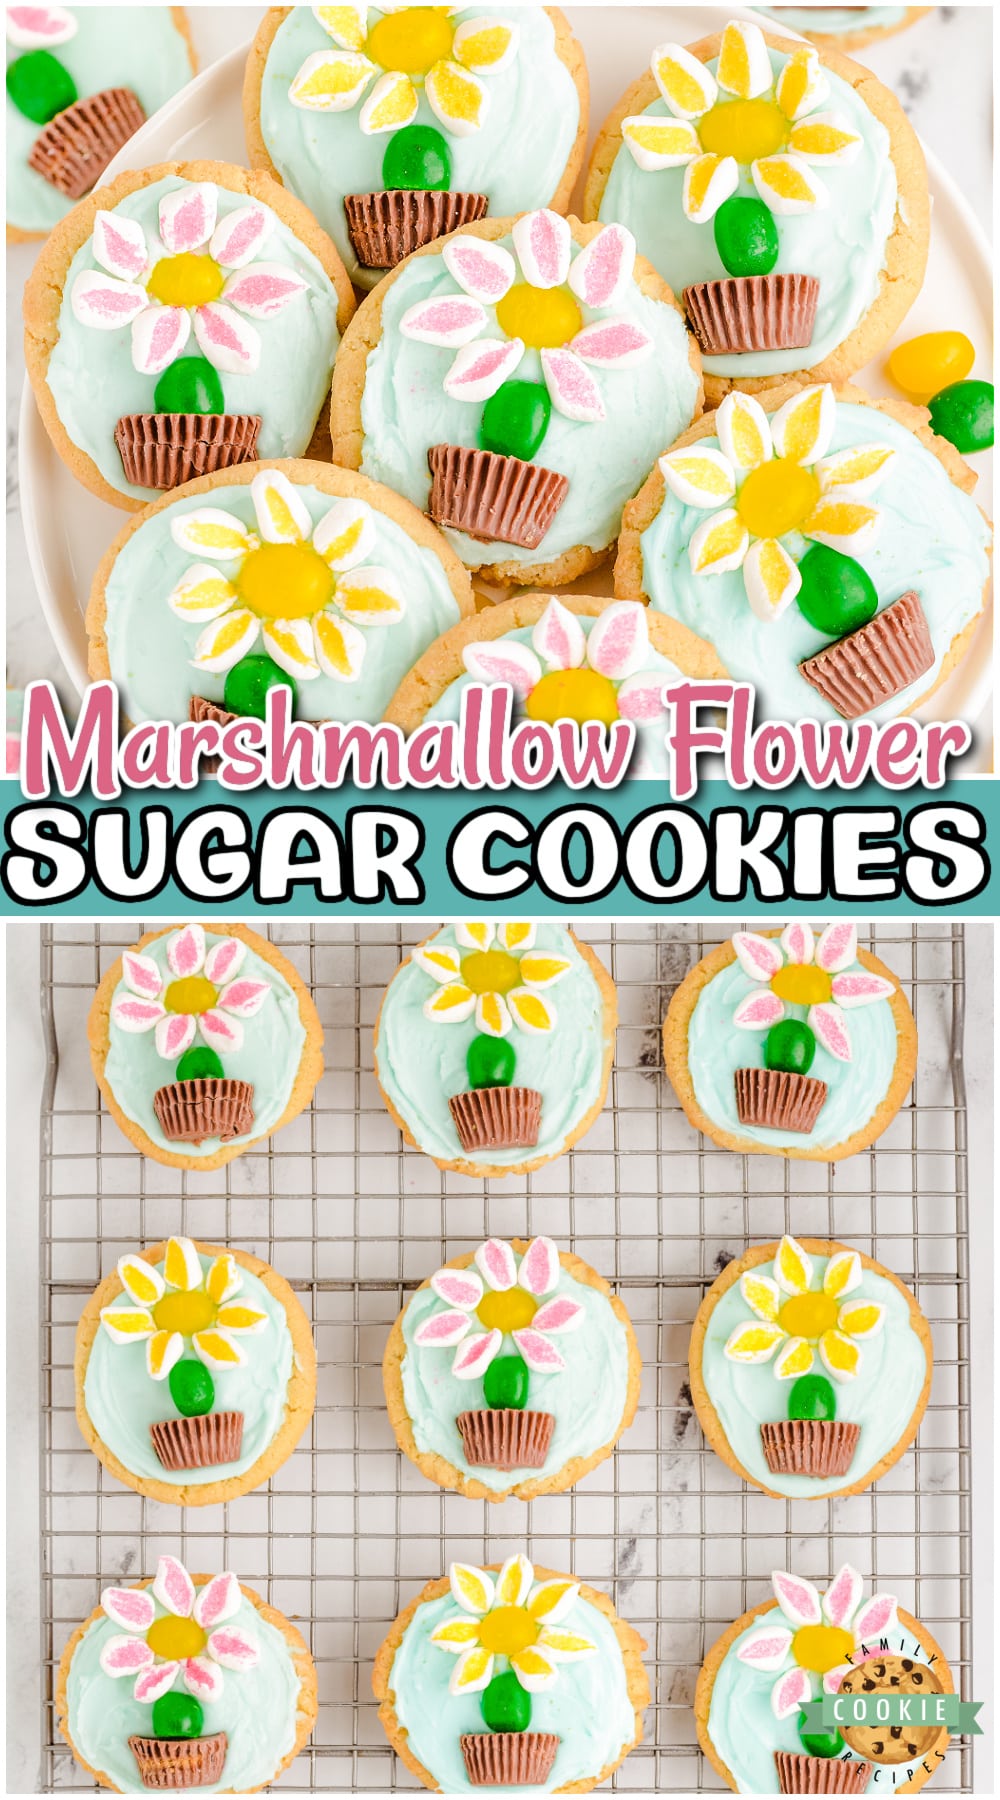 Marshmallow Flower Cookies are easy to make and perfect for Spring baking! Cute flower sugar cookies topped with marshmallow flowers, a jelly bean stem, in a peanut butter chocolate pot.